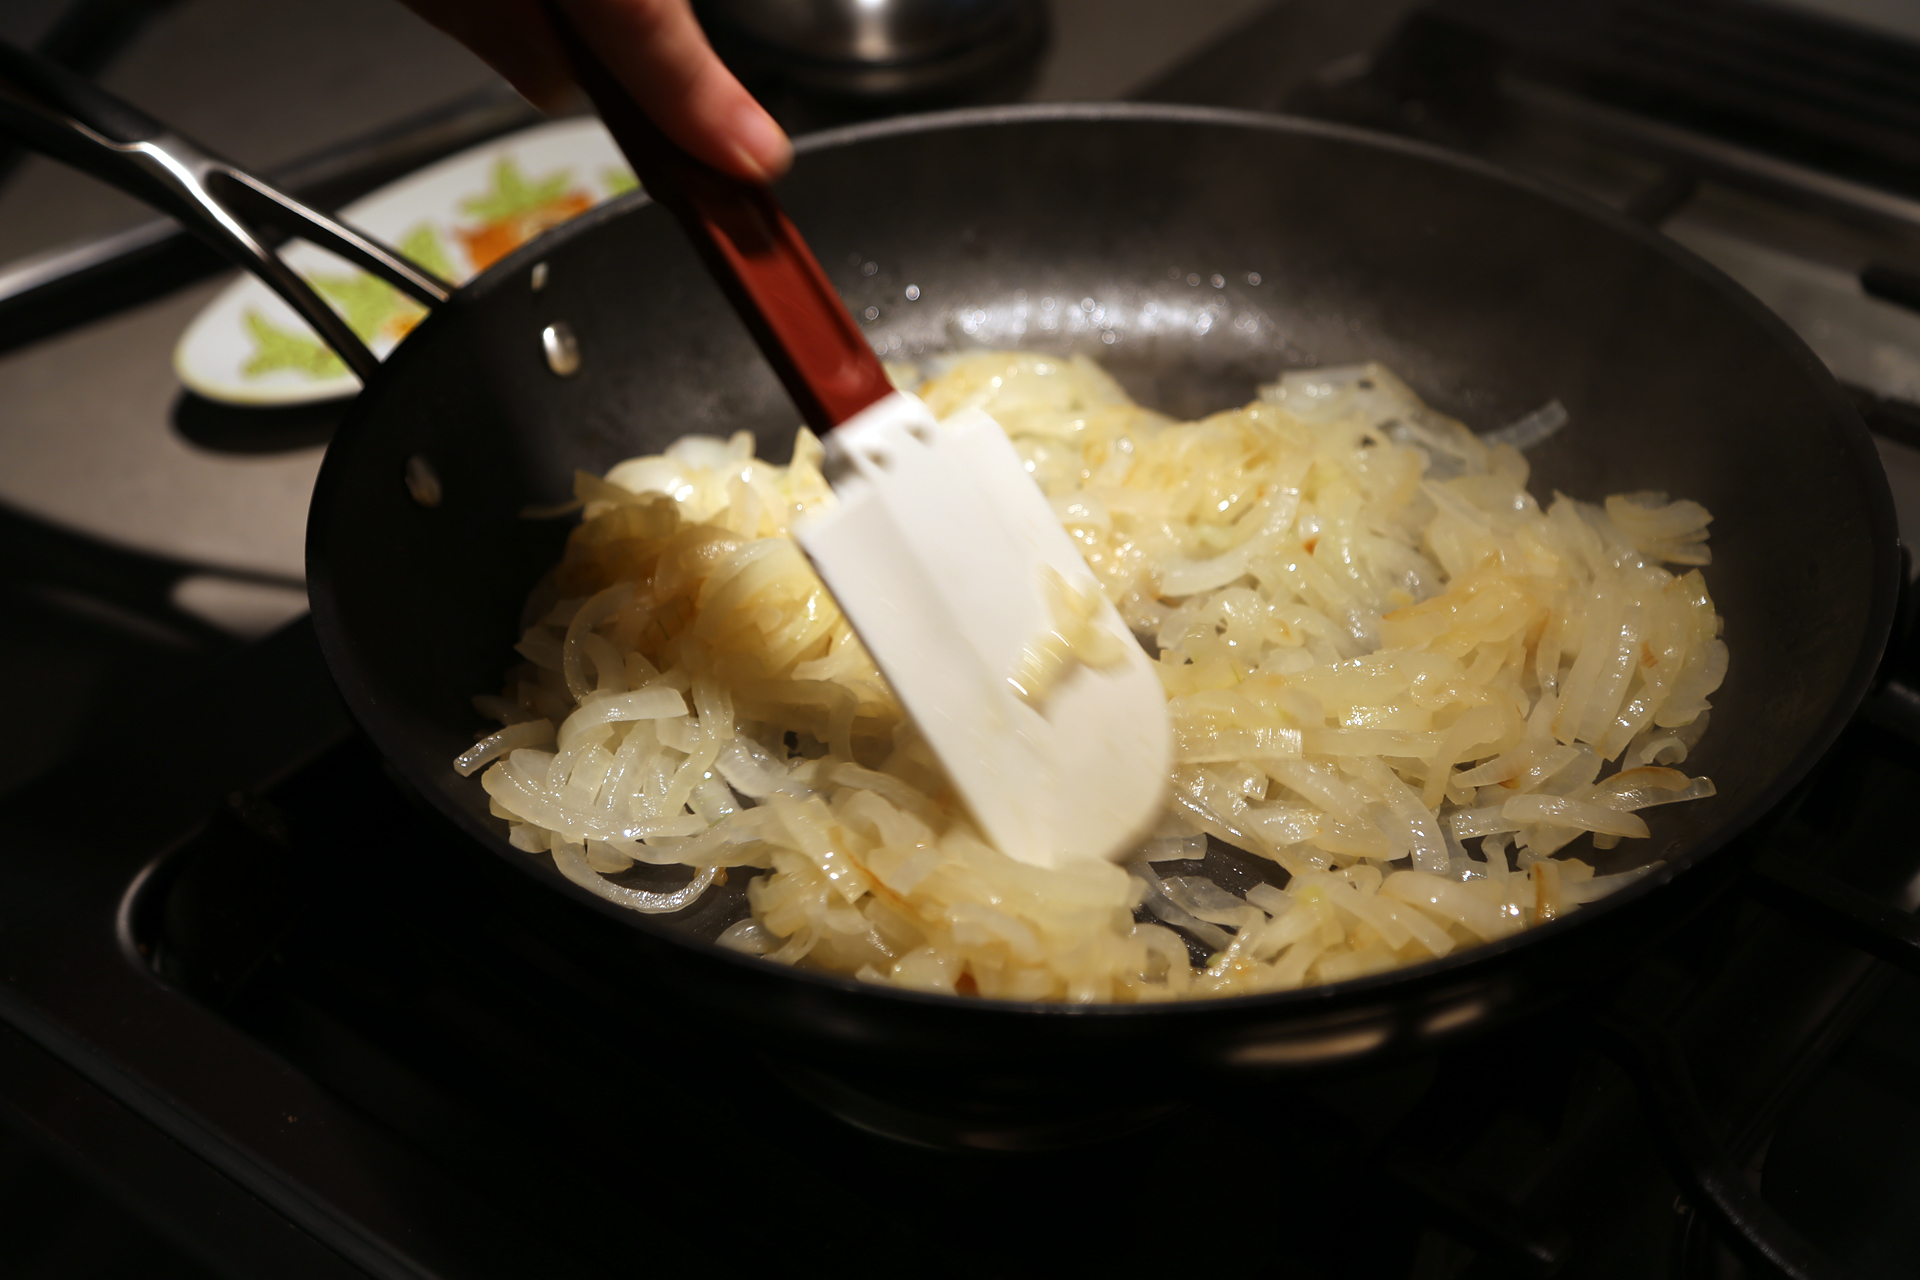 Add the onions and a big pinch of salt, cover the pan, and cook, stirring occasionally, until golden brown and softened,